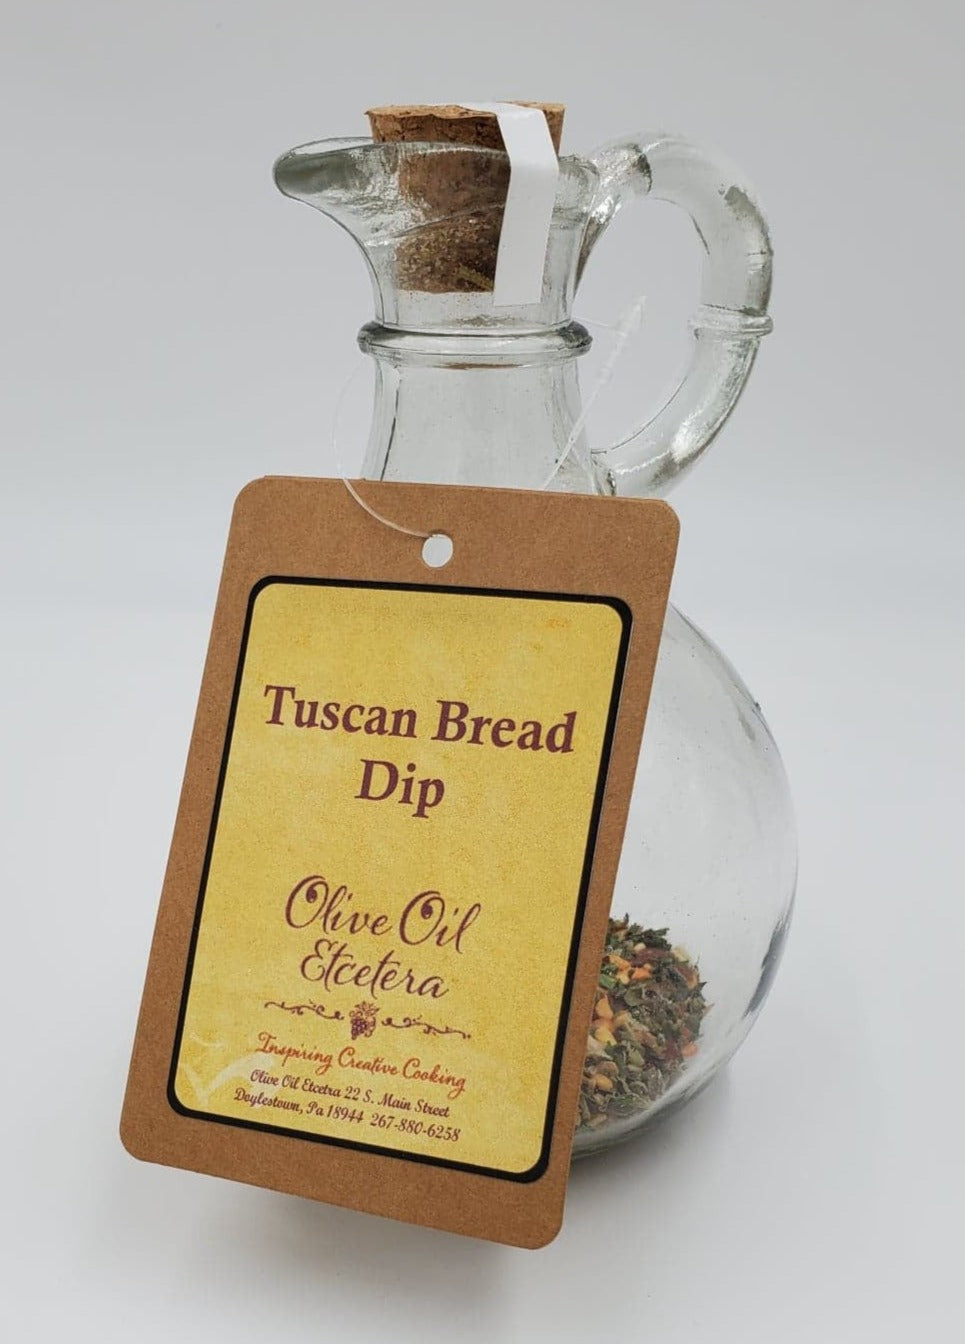 Tuscany Bread Dipping Seasoning - The Olive Oil Market